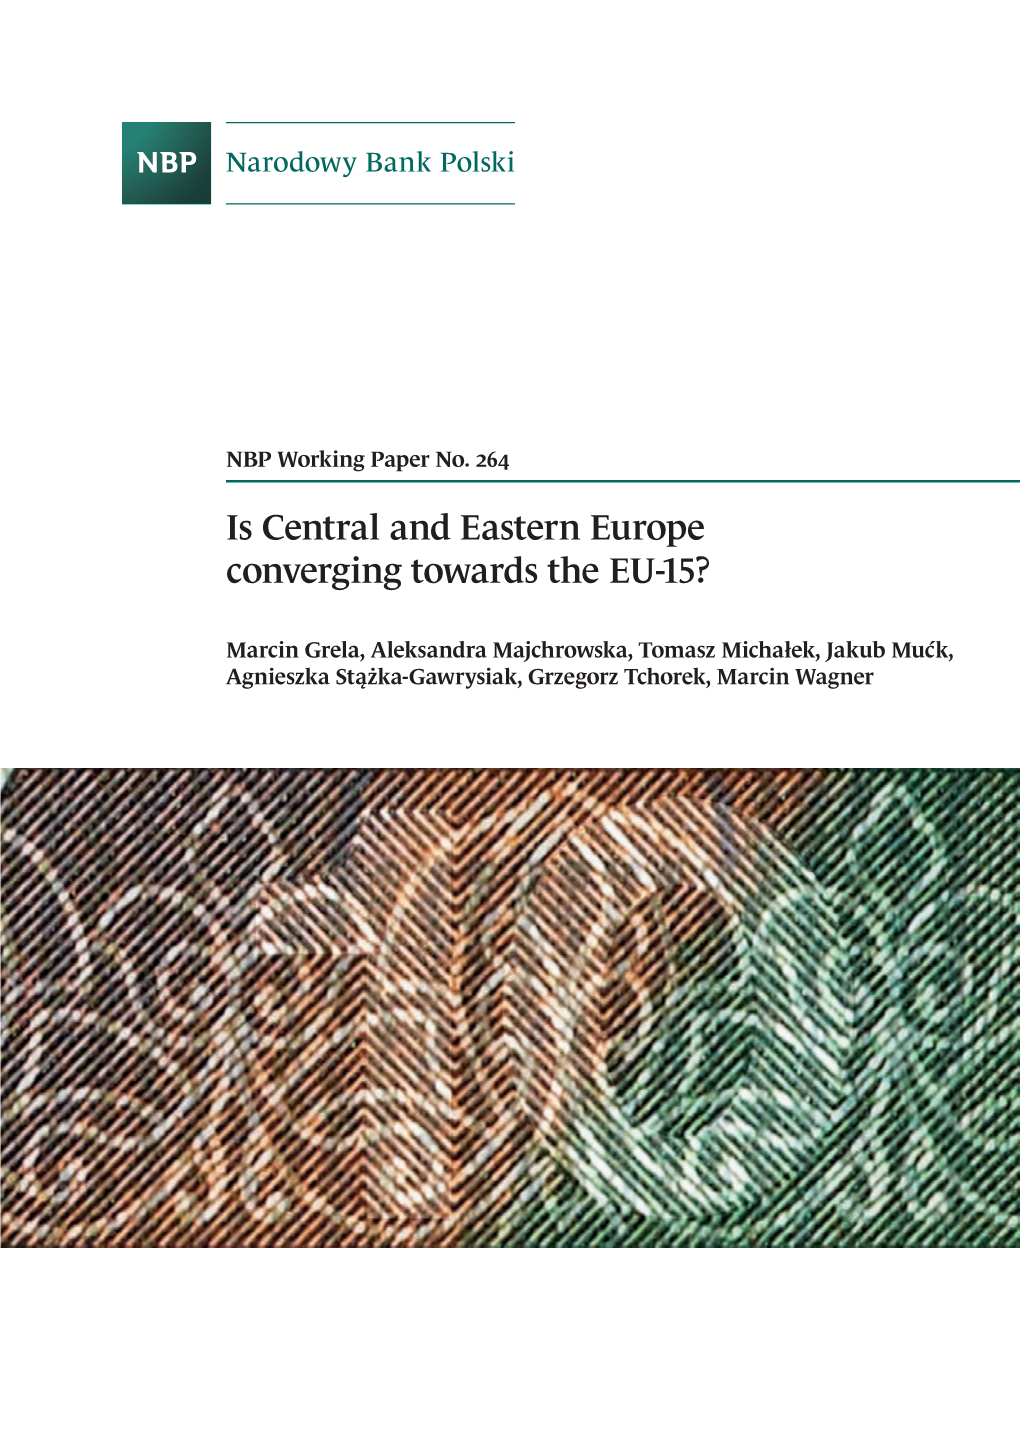 Is Central and Eastern Europe Converging Towards the EU-15?